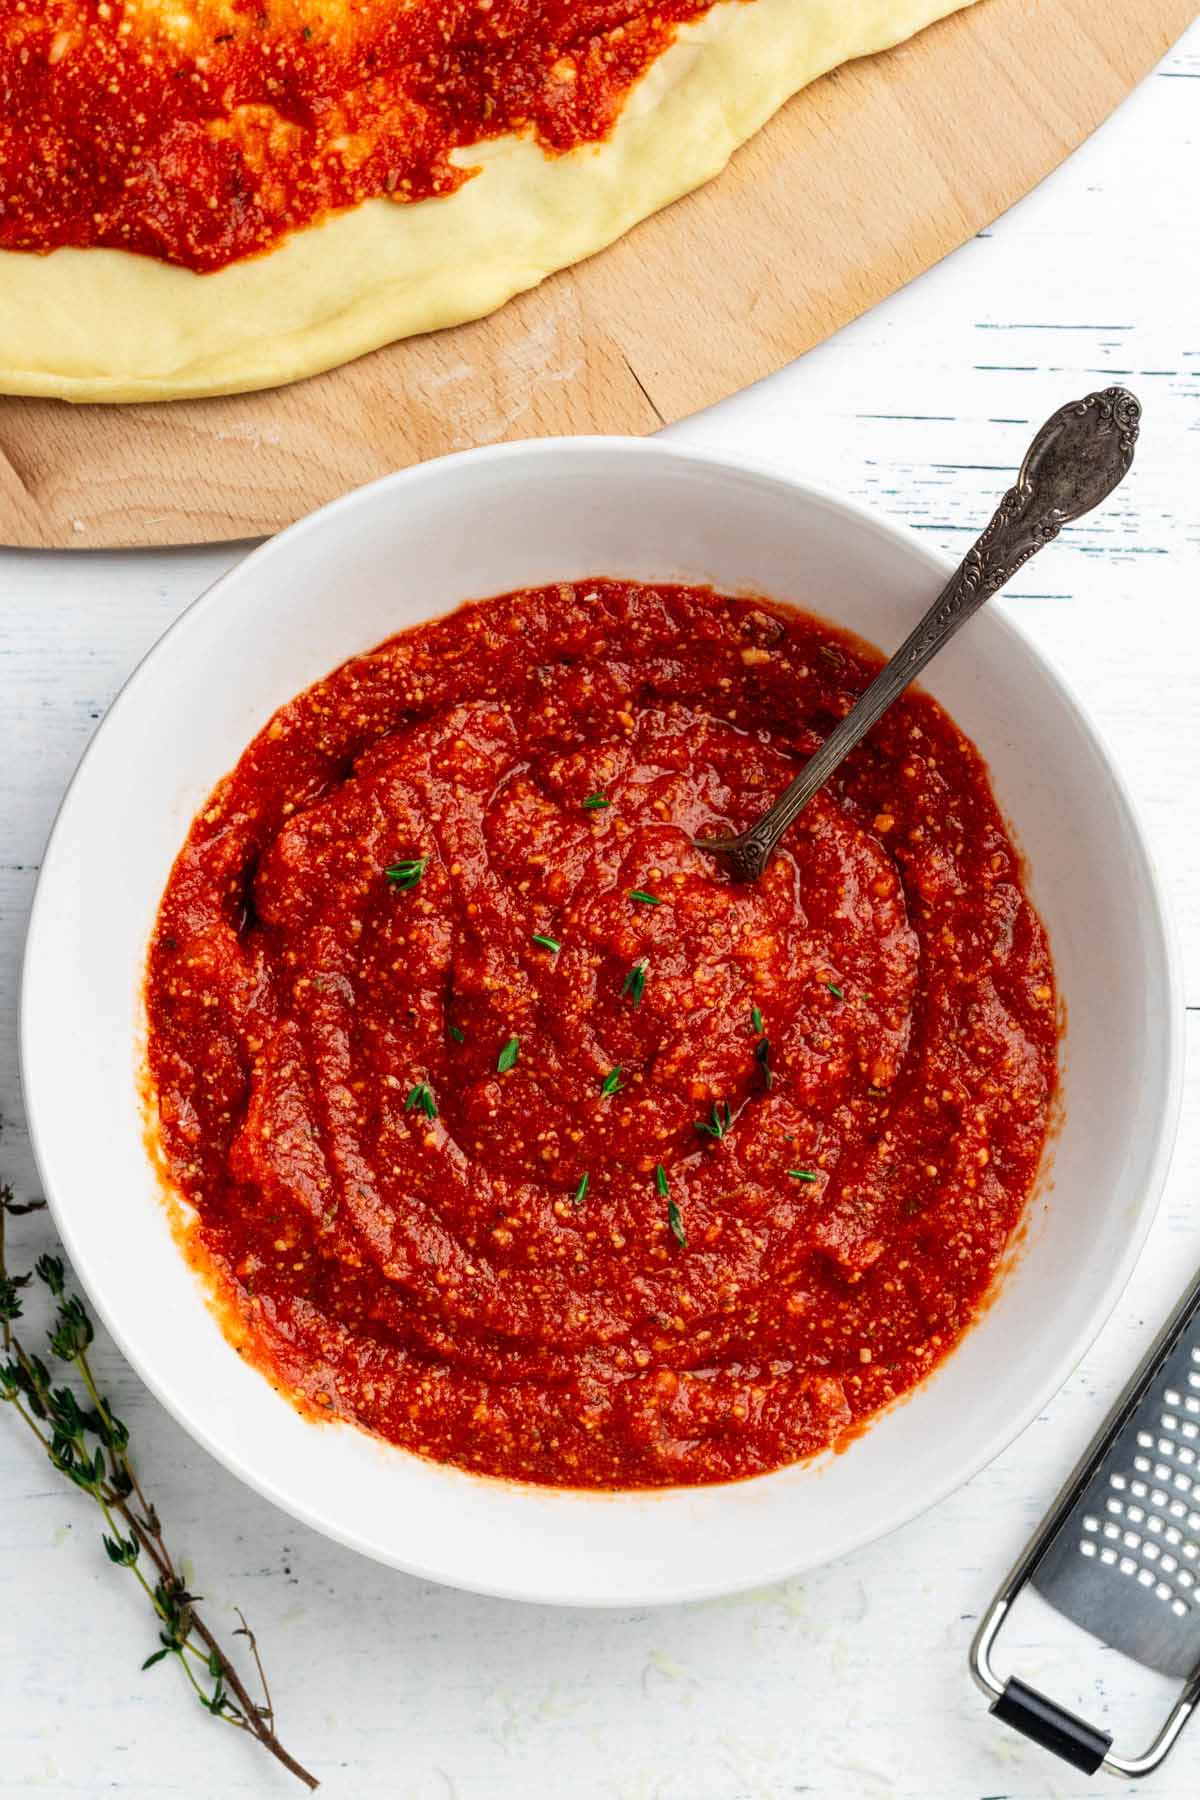 Overhead view of pizza sauce in a white bowl with a spoon.